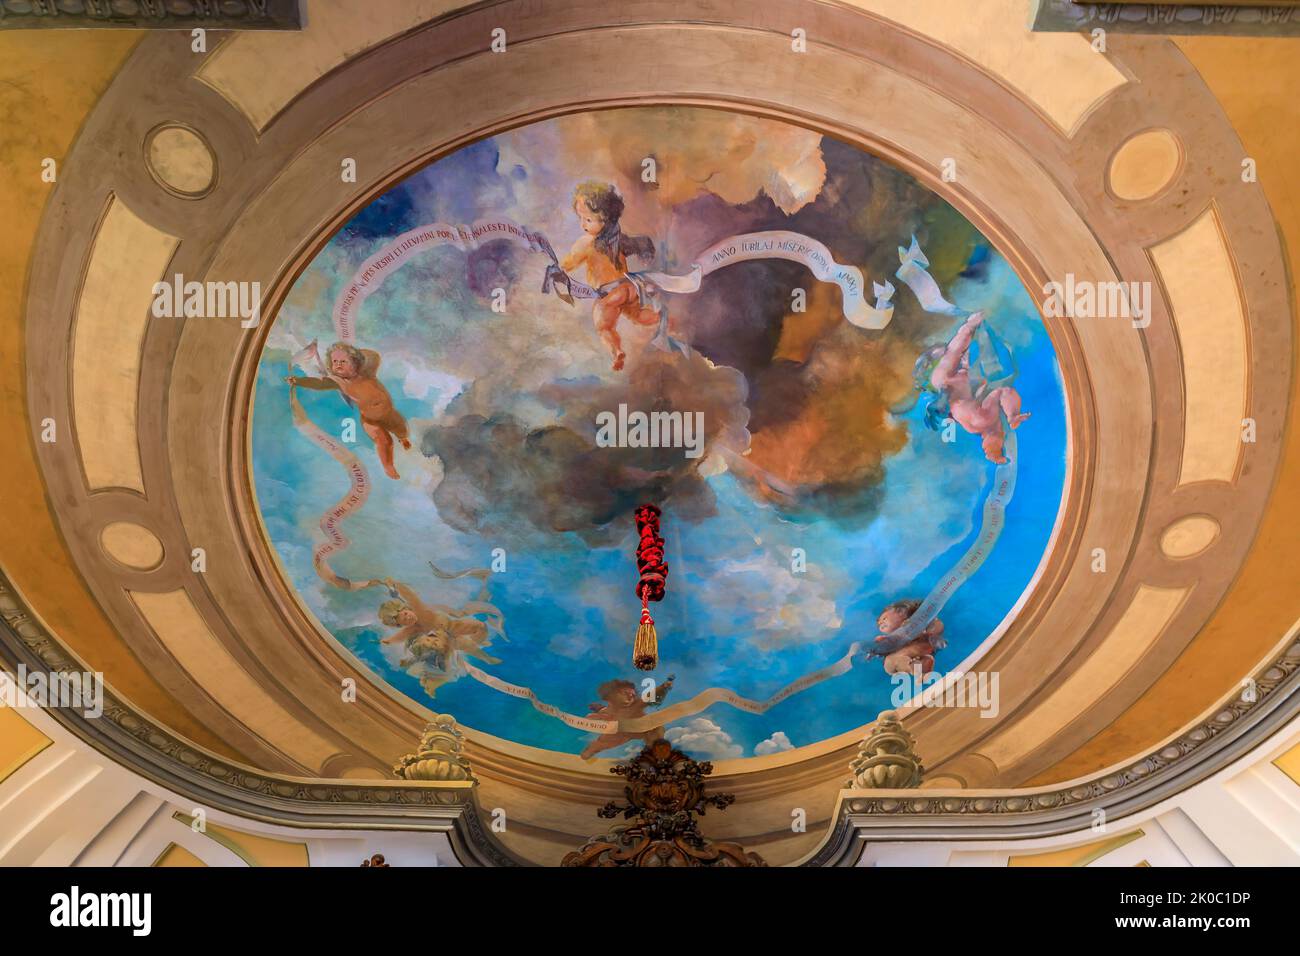 Madrid, Spain - June 28, 2021: Ornate ceiling fresco of baroque Cathedral Church of Armed Forces or Iglesia Catedral de las Fuerzas Armadas Stock Photo